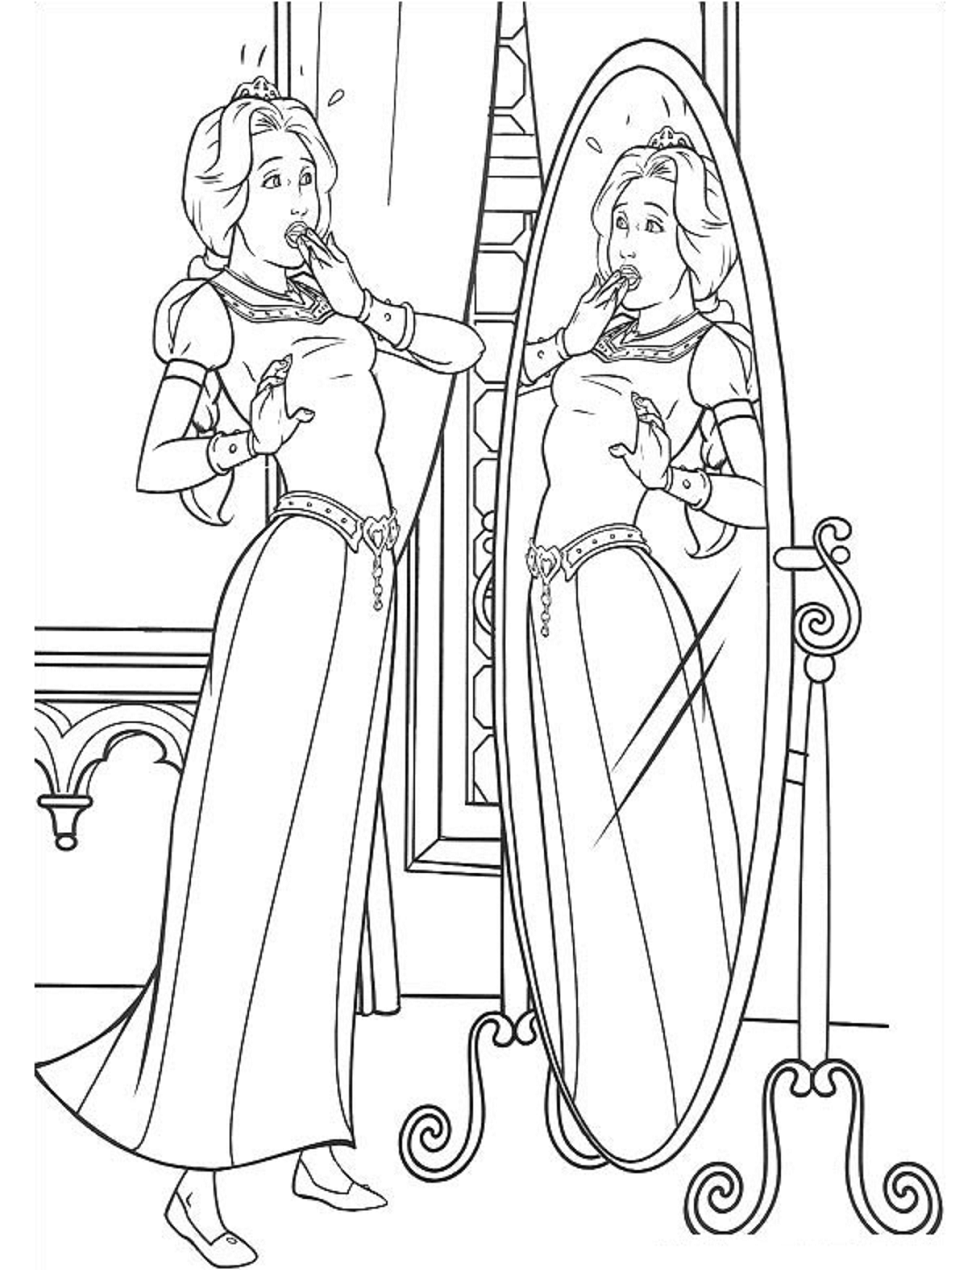 Fiona Looking In The Mirror Coloring Page - Free Printable ...